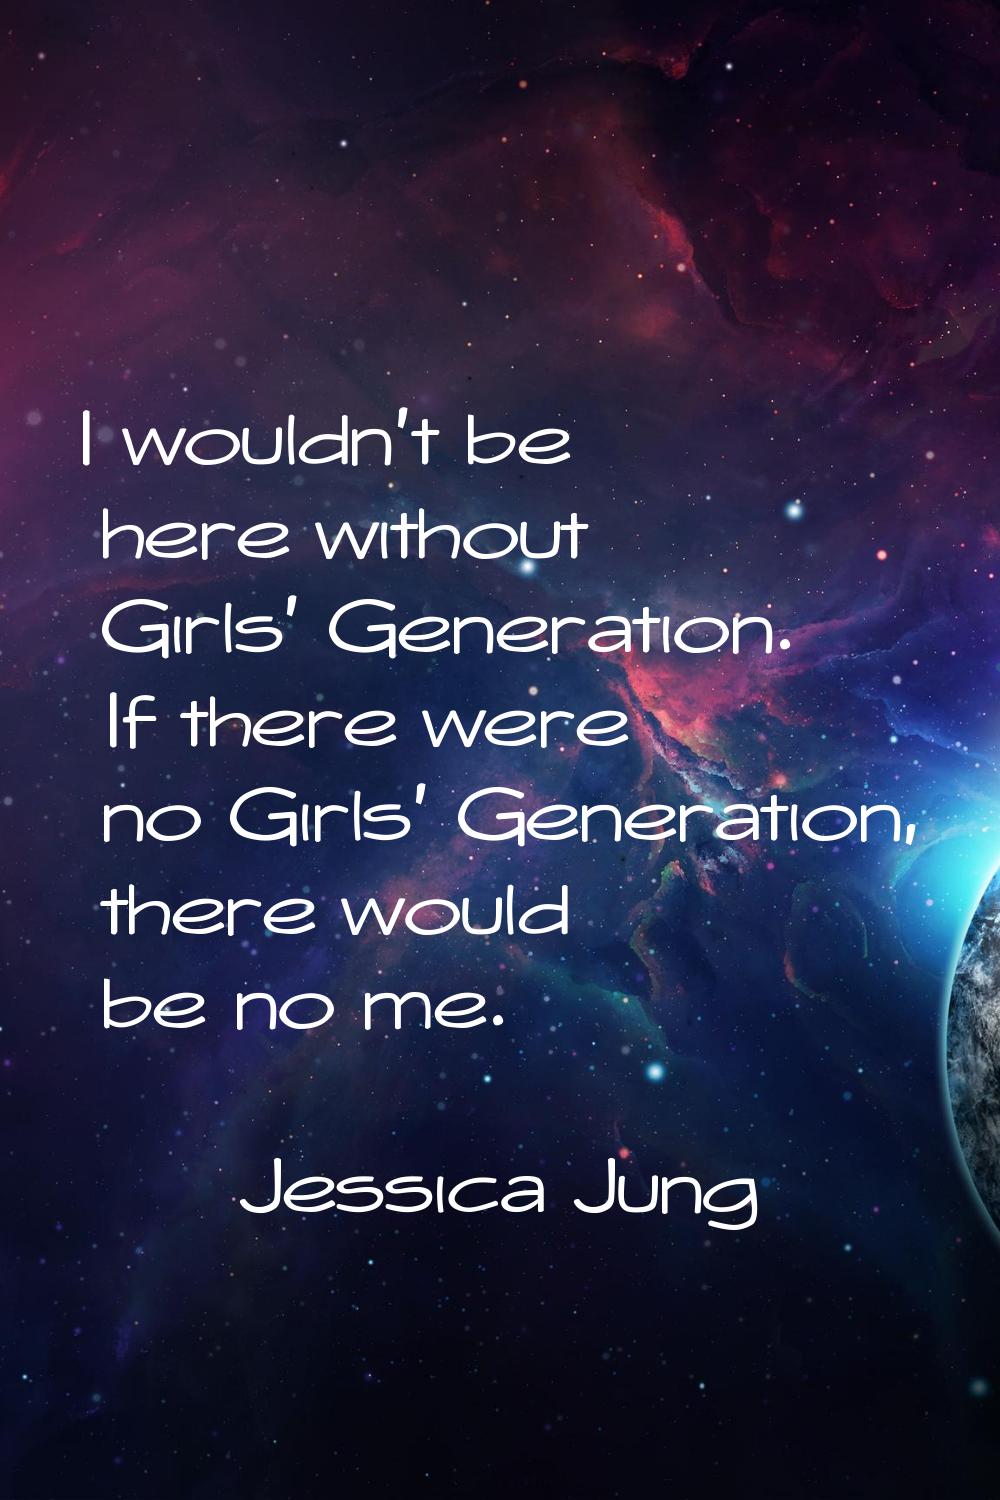 I wouldn't be here without Girls' Generation. If there were no Girls' Generation, there would be no